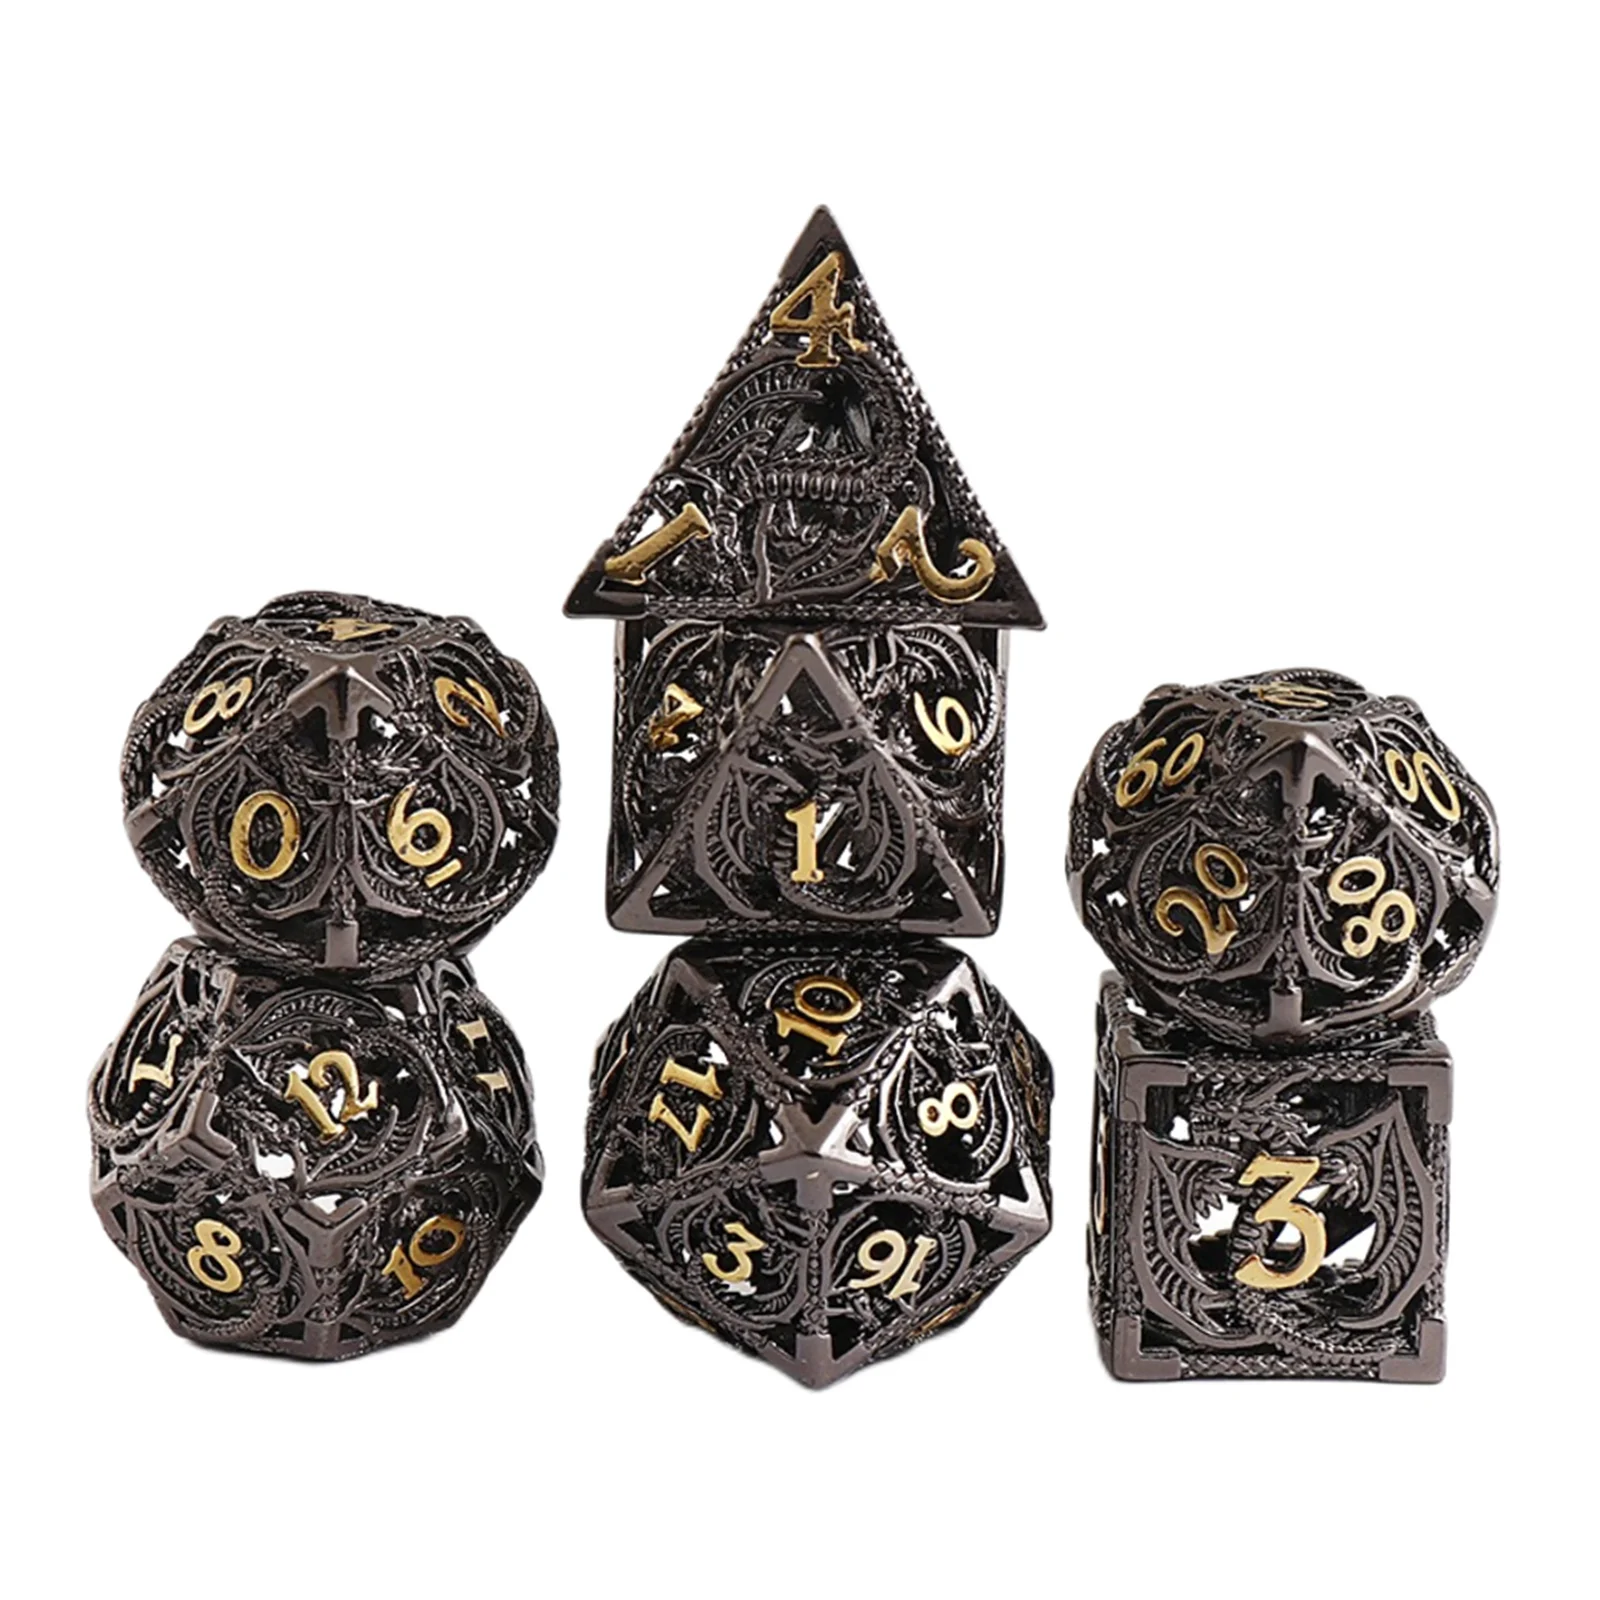 7Pcs Metal DND Dice Set Dragon Pattern Shape Hollow-carved Design D&D Polyhedral Dice with Carry Case Role Playing Game PRG